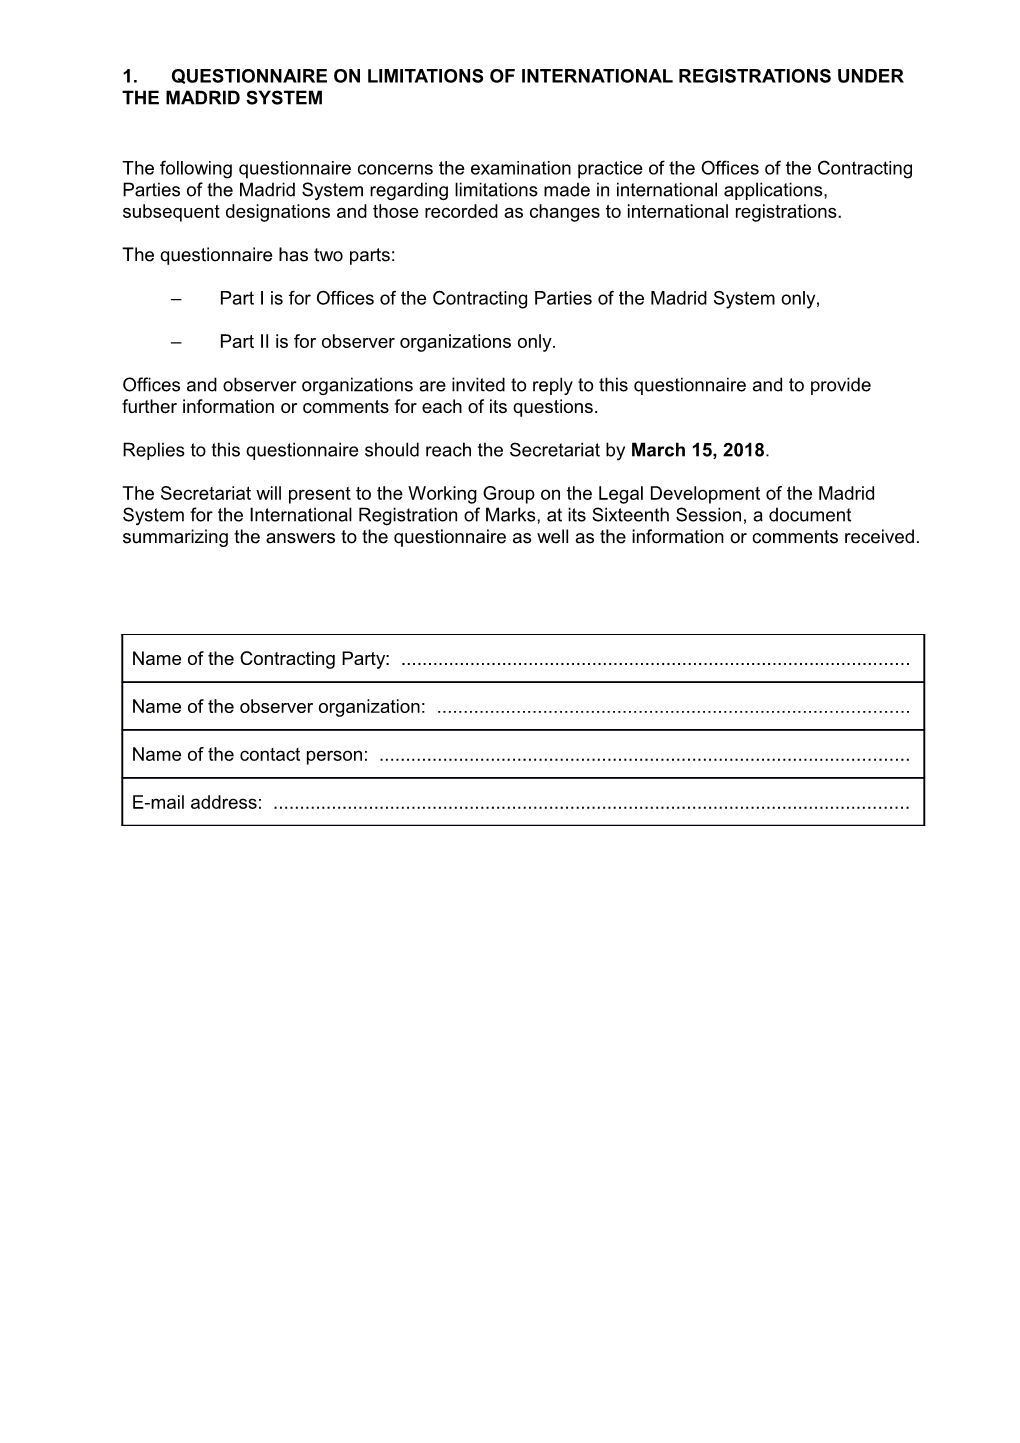 QUESTIONNAIRE on LIMITATIONS of International Registrations Under Themadrid System